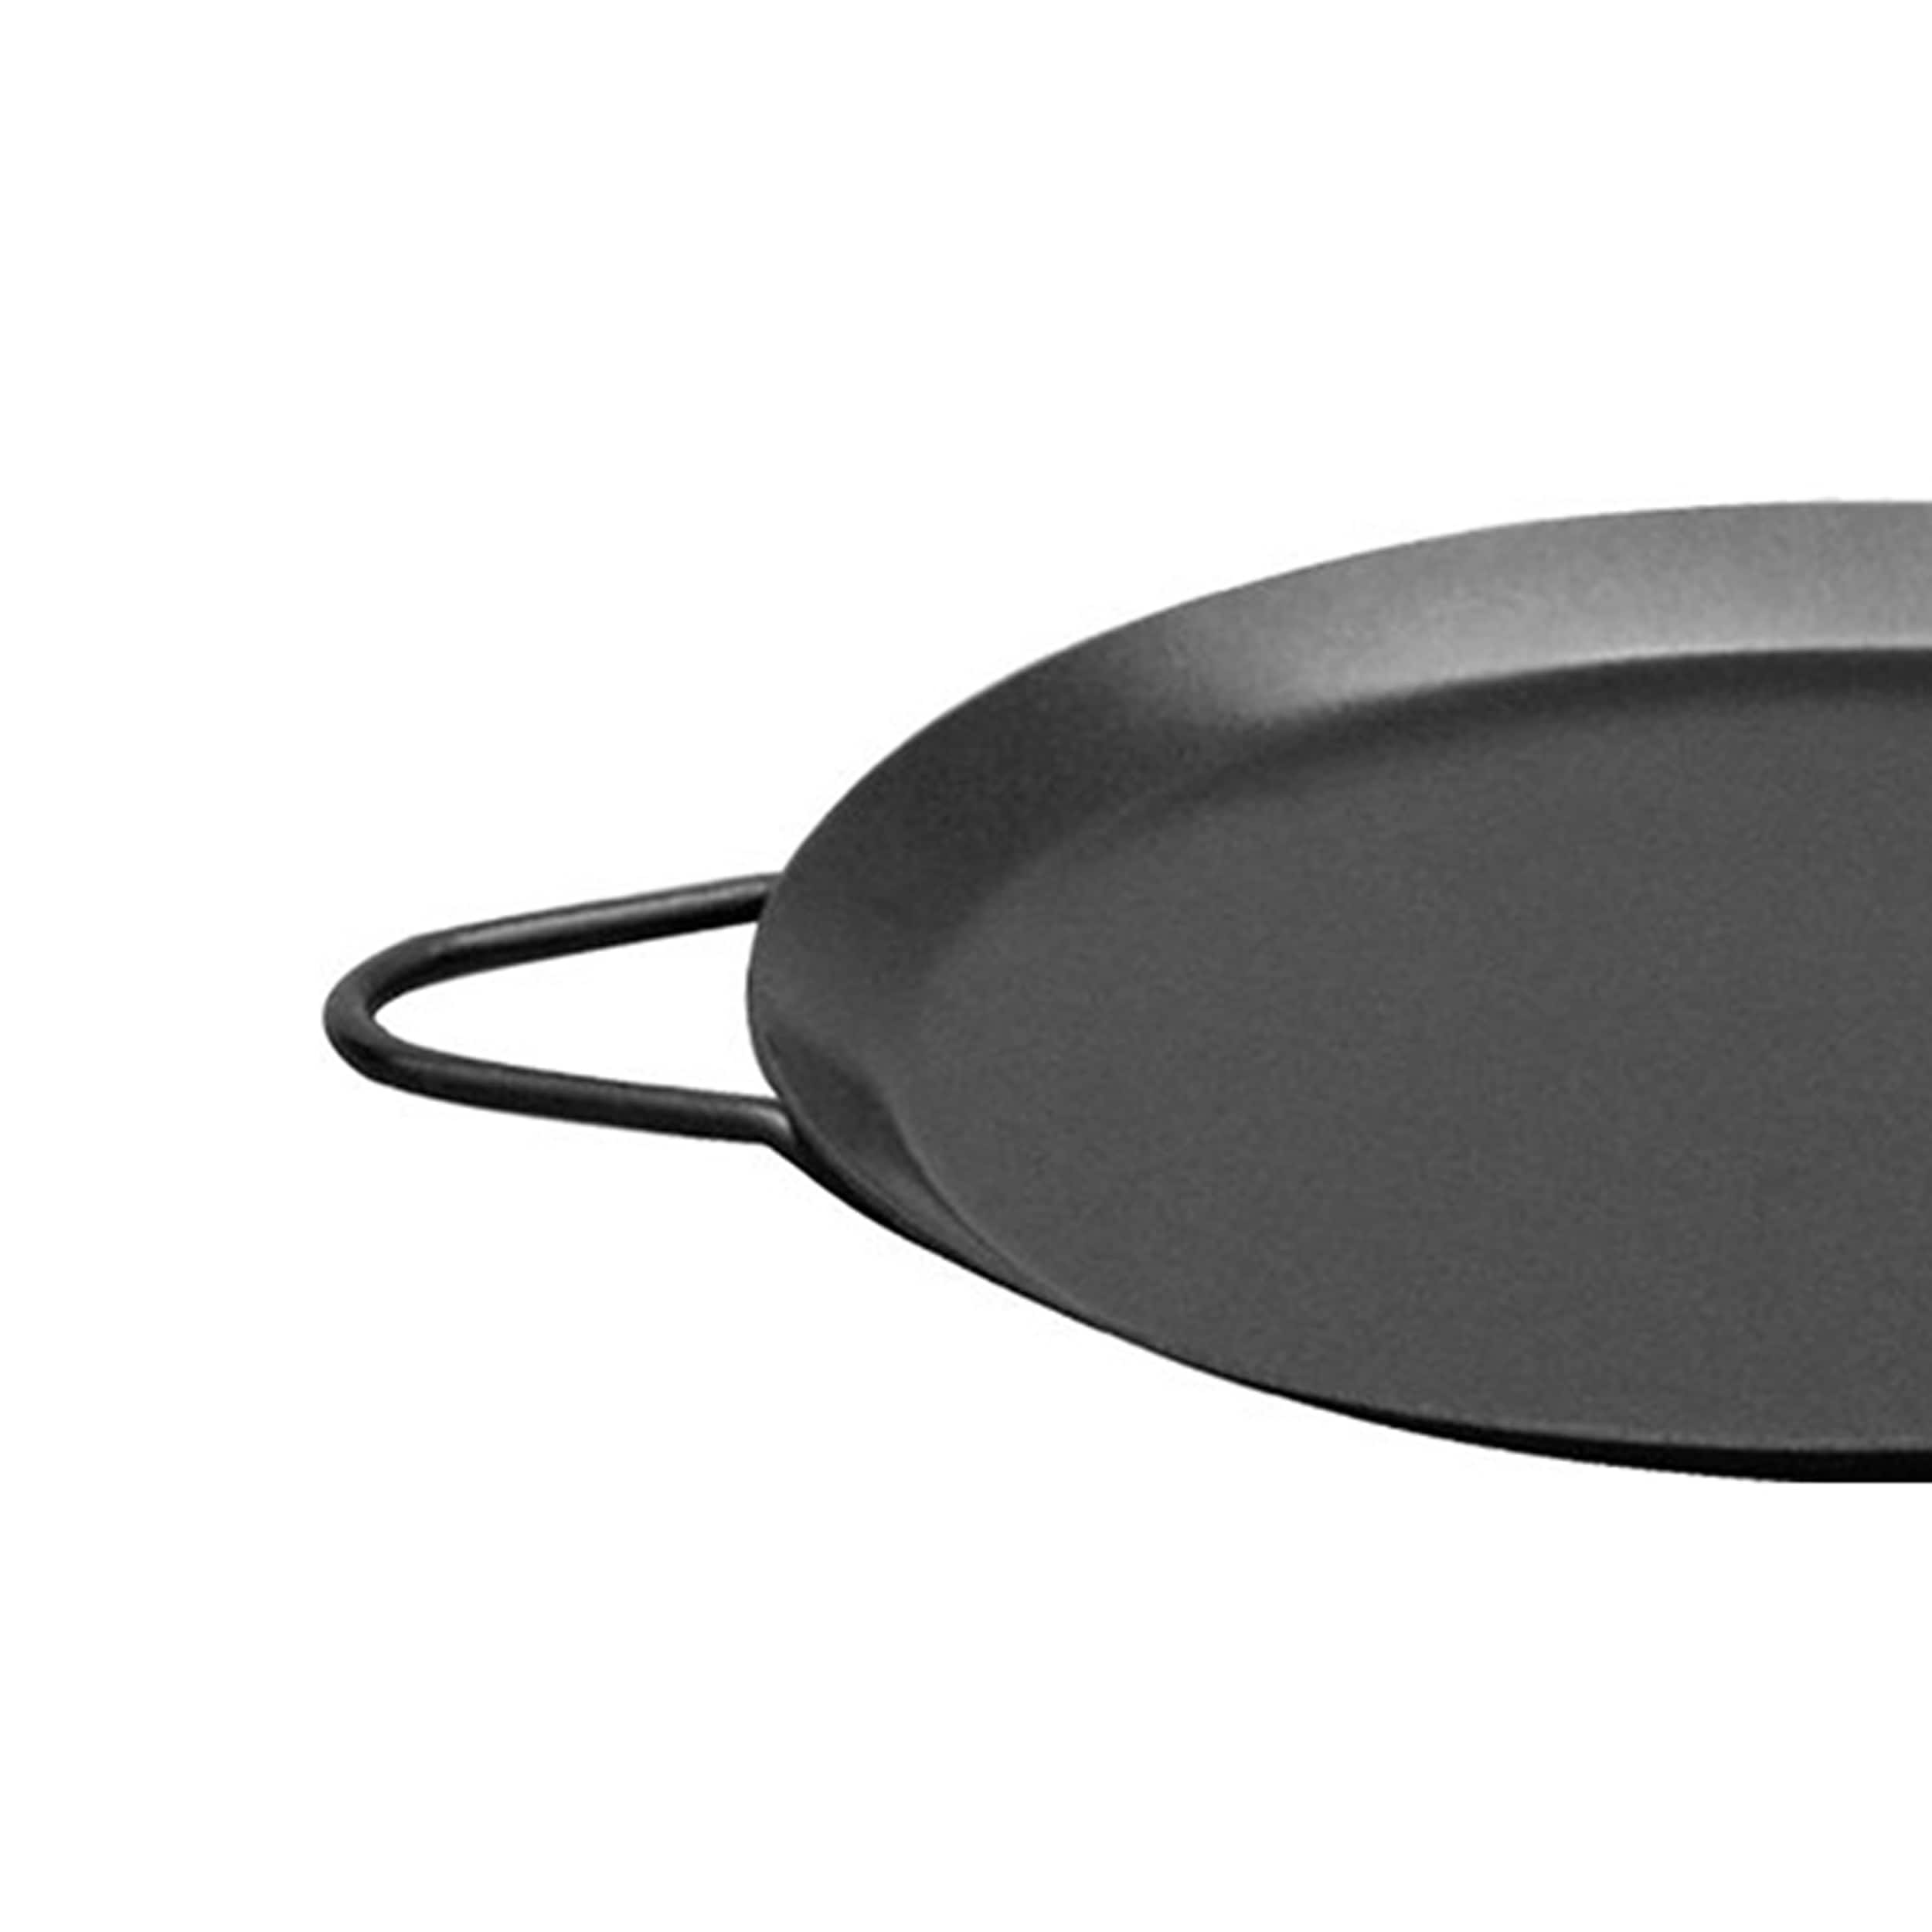 https://ak1.ostkcdn.com/images/products/is/images/direct/88e50e36efe1e2bf4005a106caae79924079f2eb/18-Inch-Dual-Tortilla-Griddle.jpg